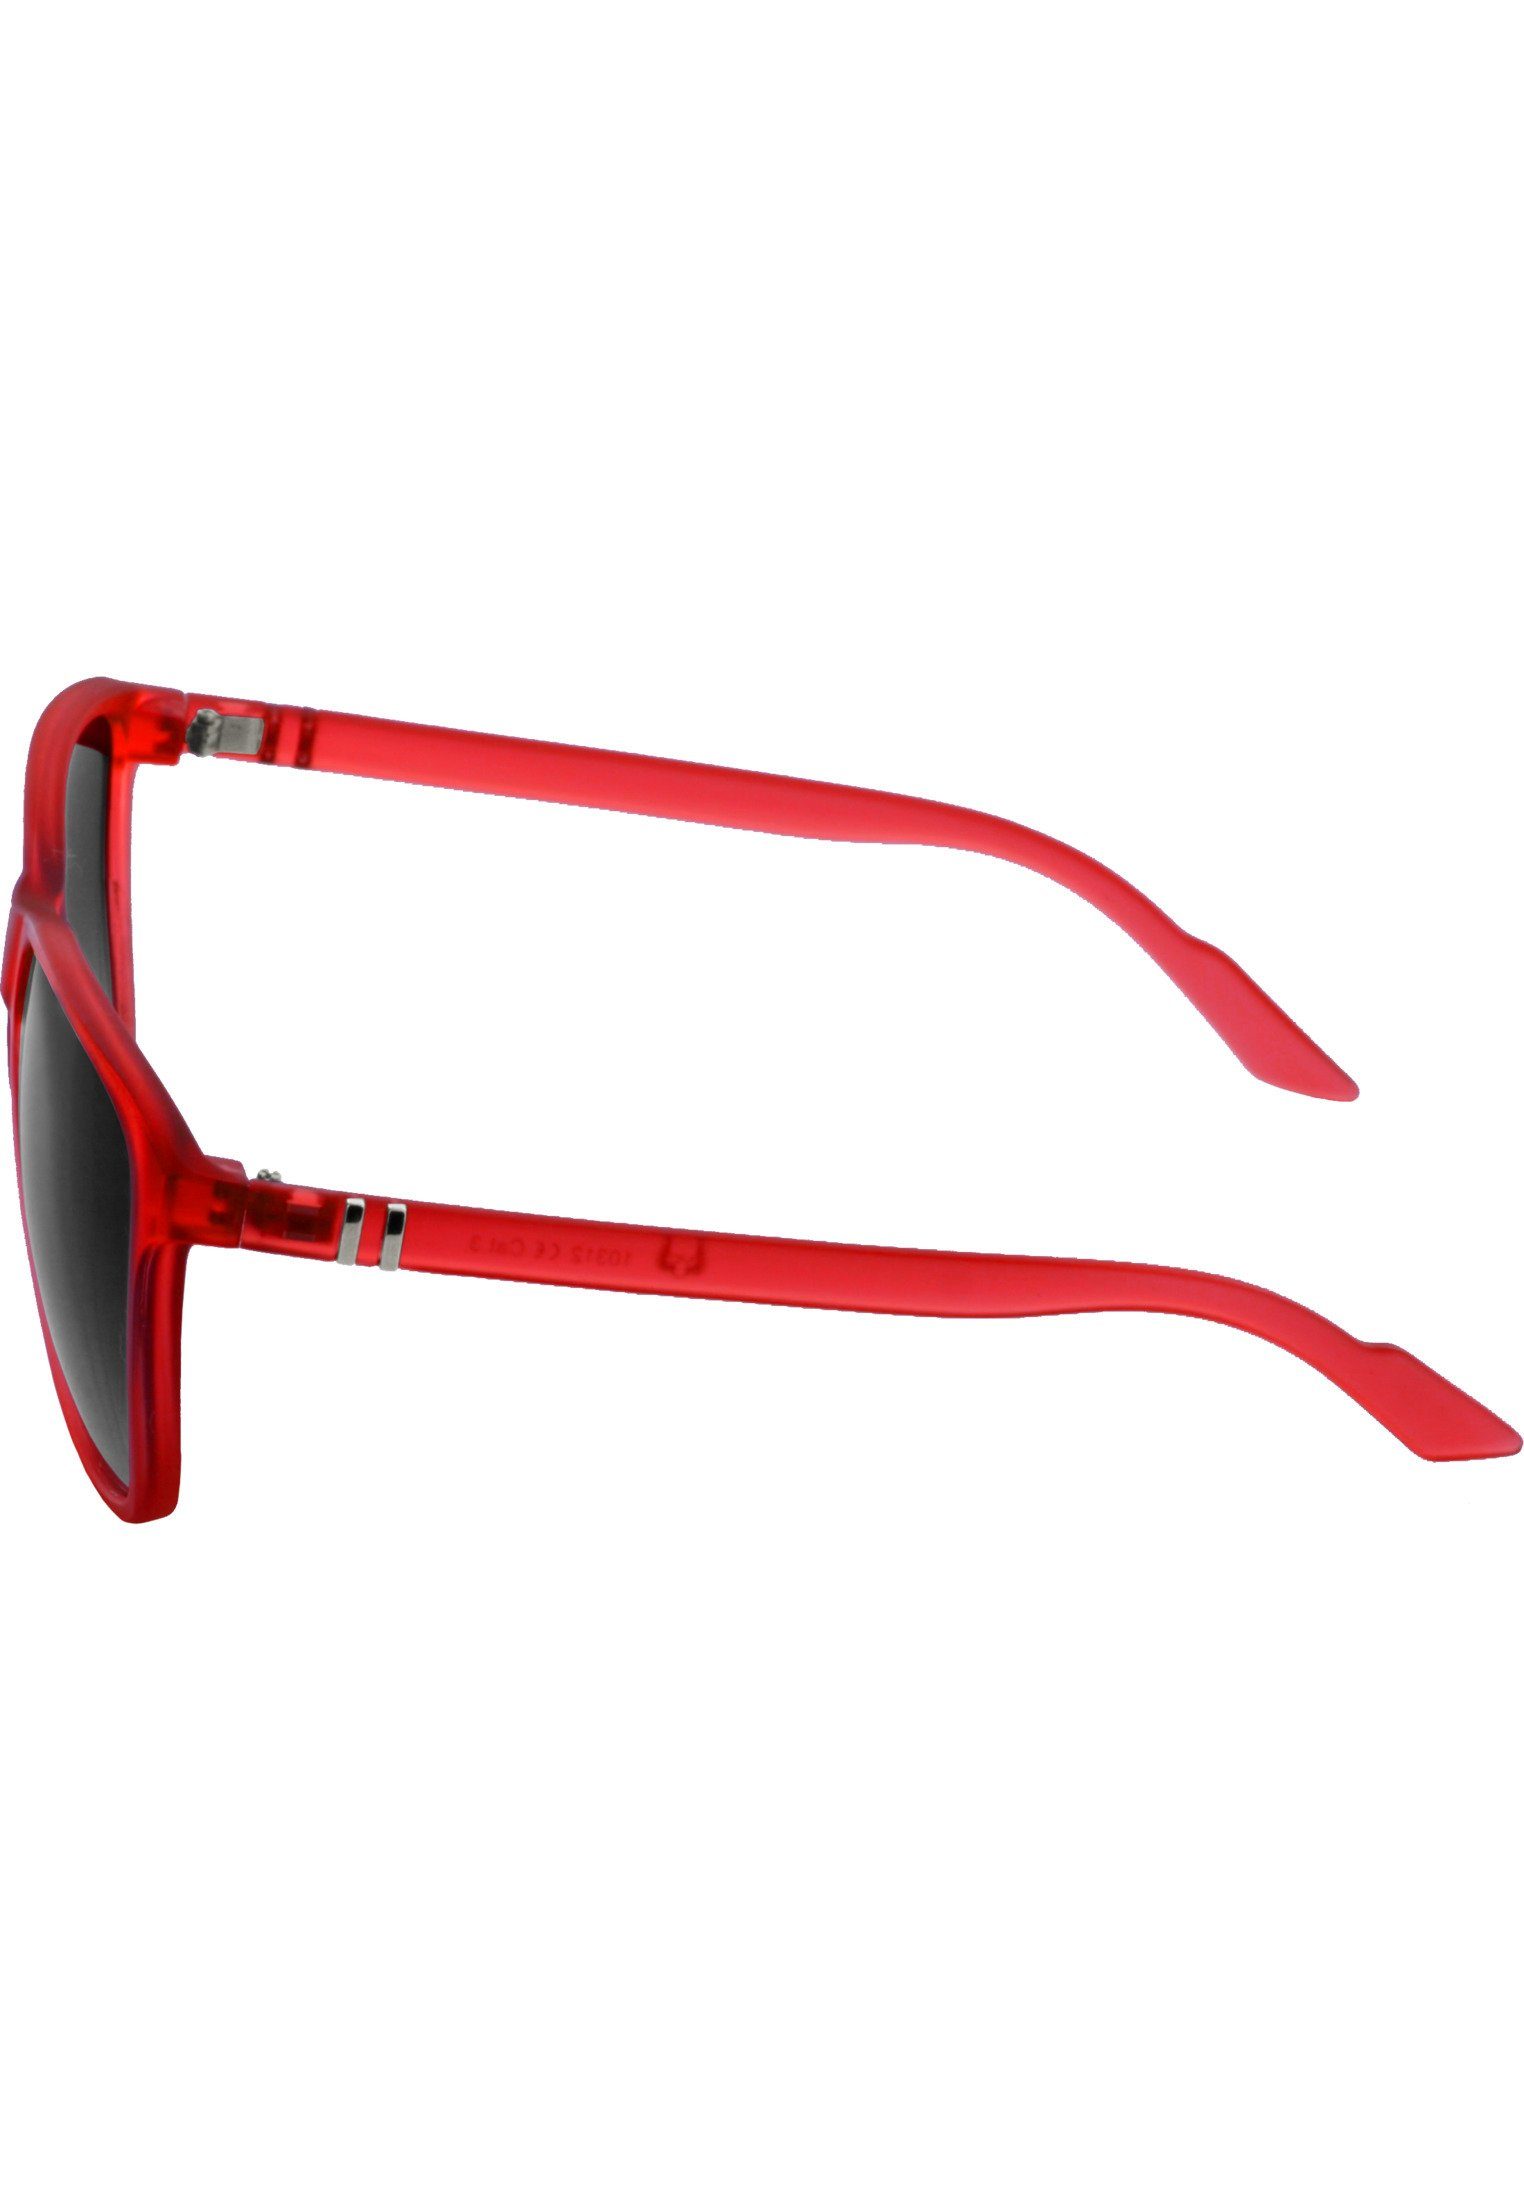 Sonnenbrille MSTRDS Chirwa Sunglasses Accessoires red